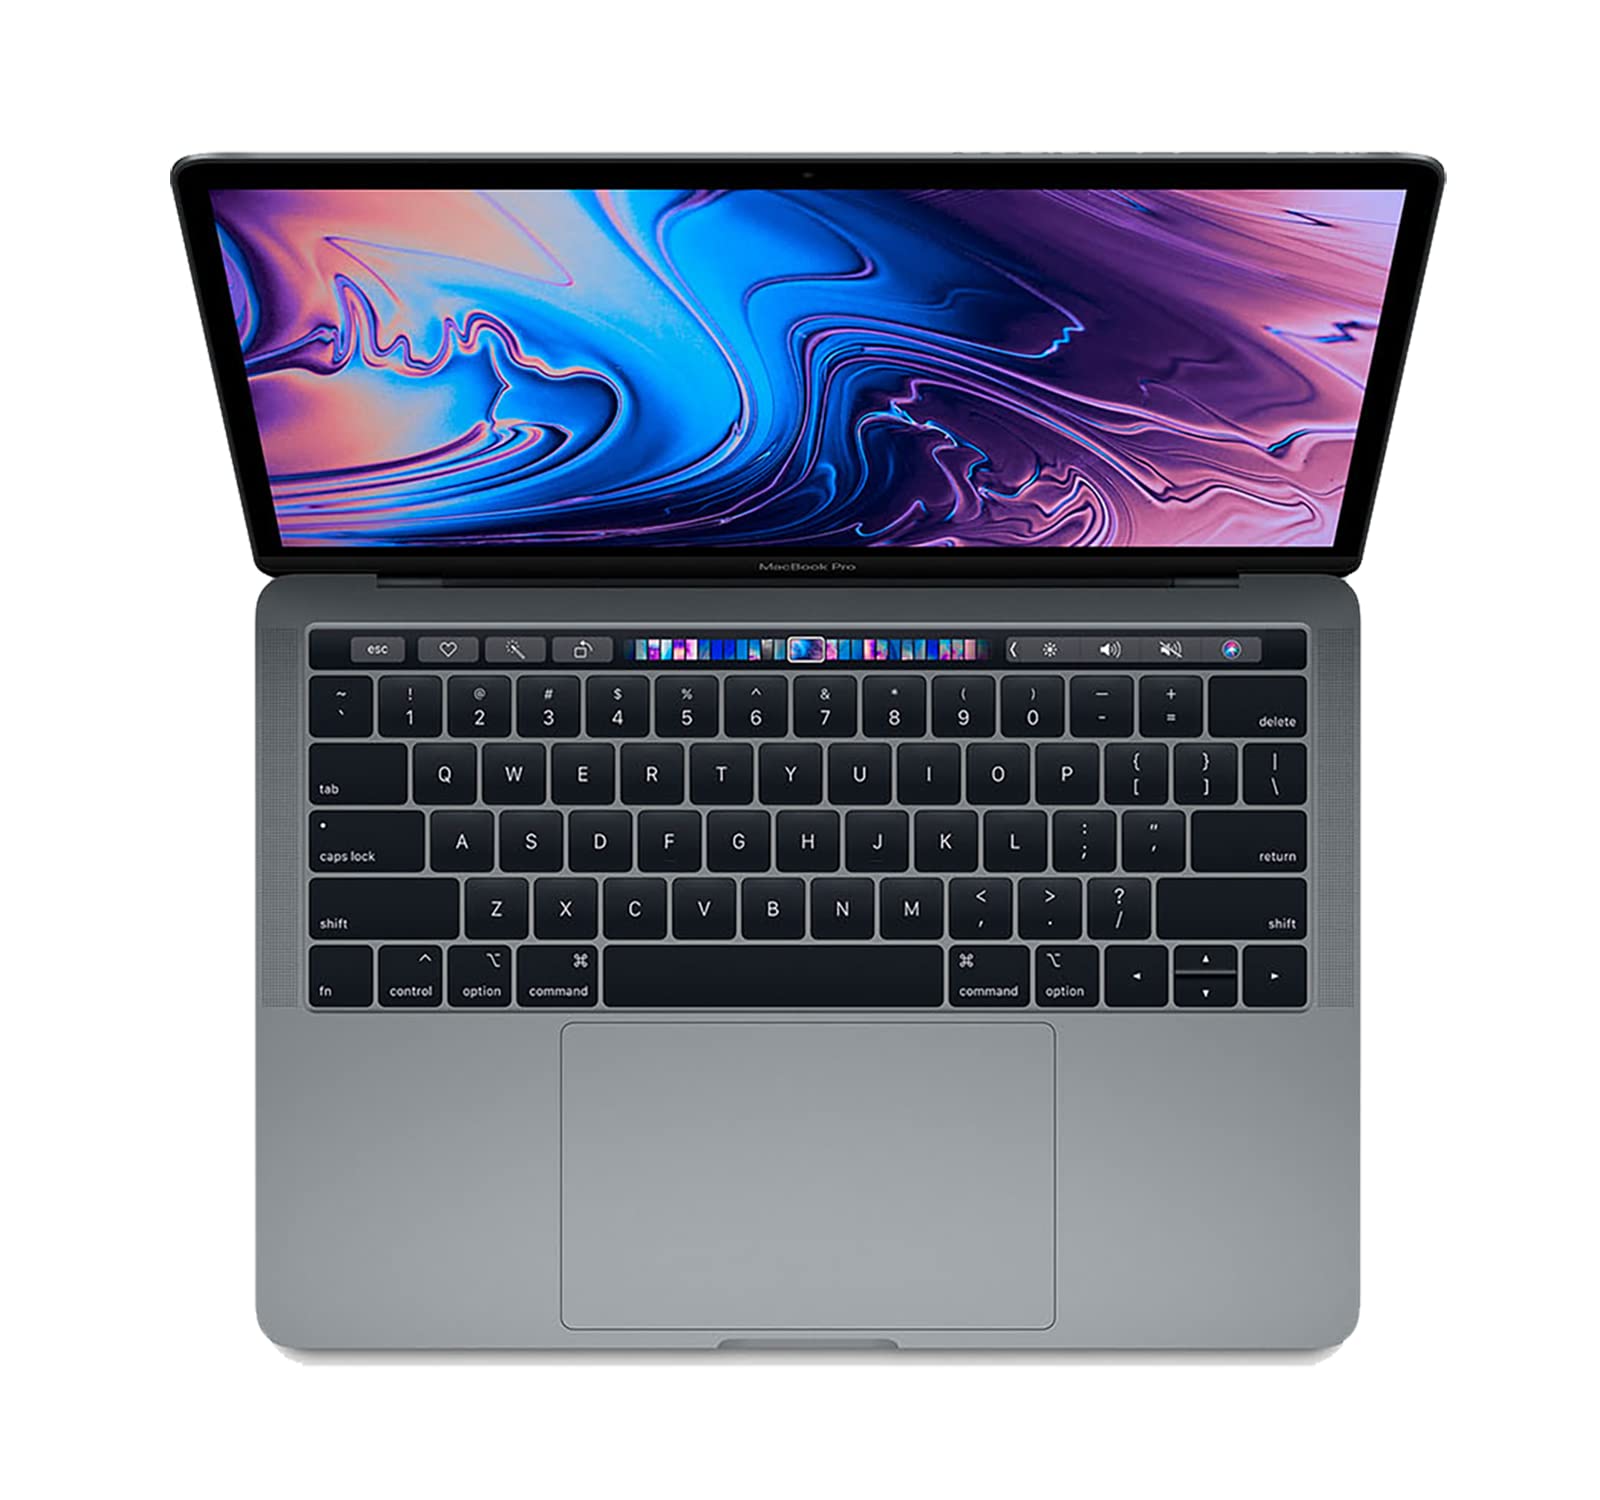 Apple -  MacBook Pro - 13"" Display with Touch Bar (Mid-2019) - Intel Core i5 - 8GB Memory - 512GB SSD - Space Gray - MV972LL/A